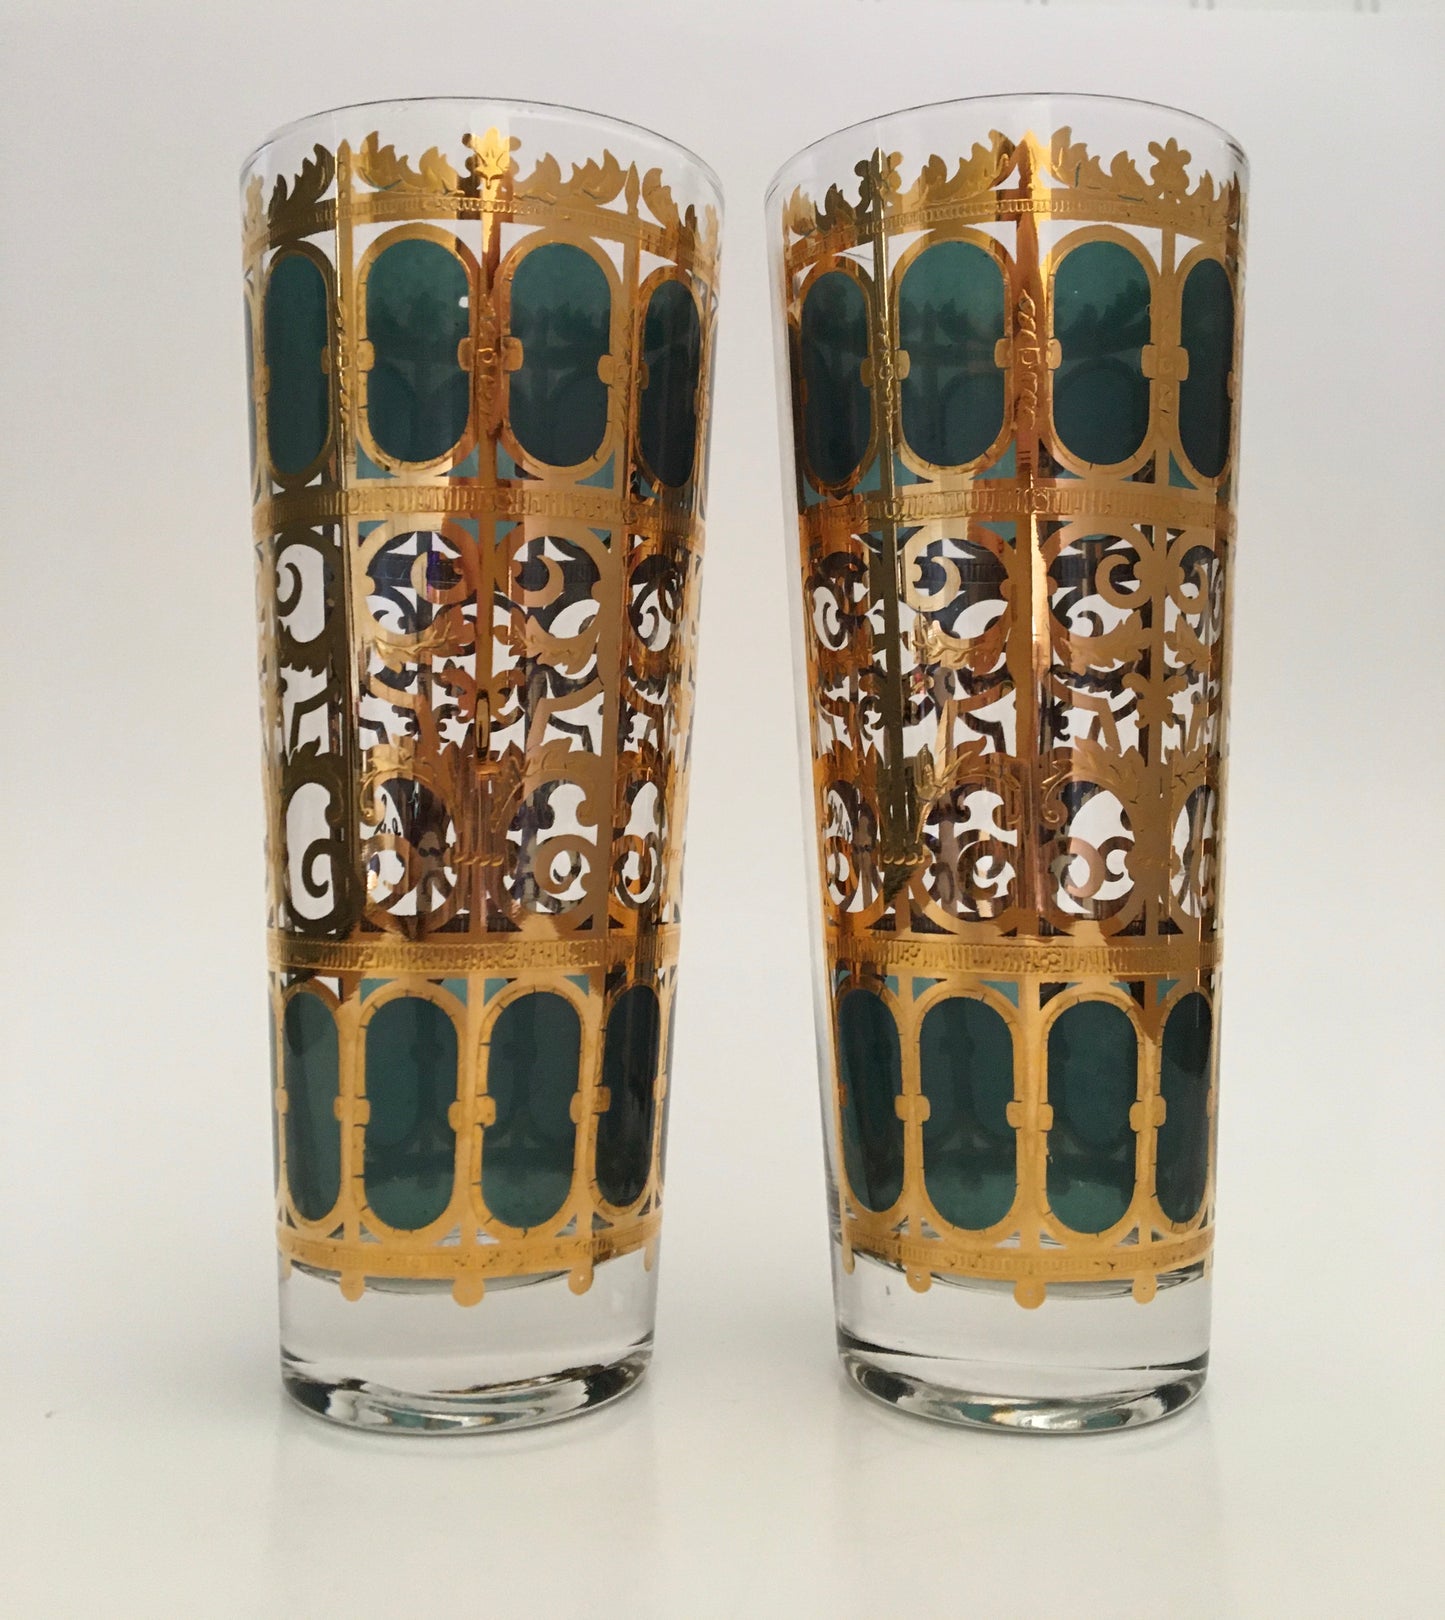 Culver Emerald Scroll Skyballs (Pair) 0 Available